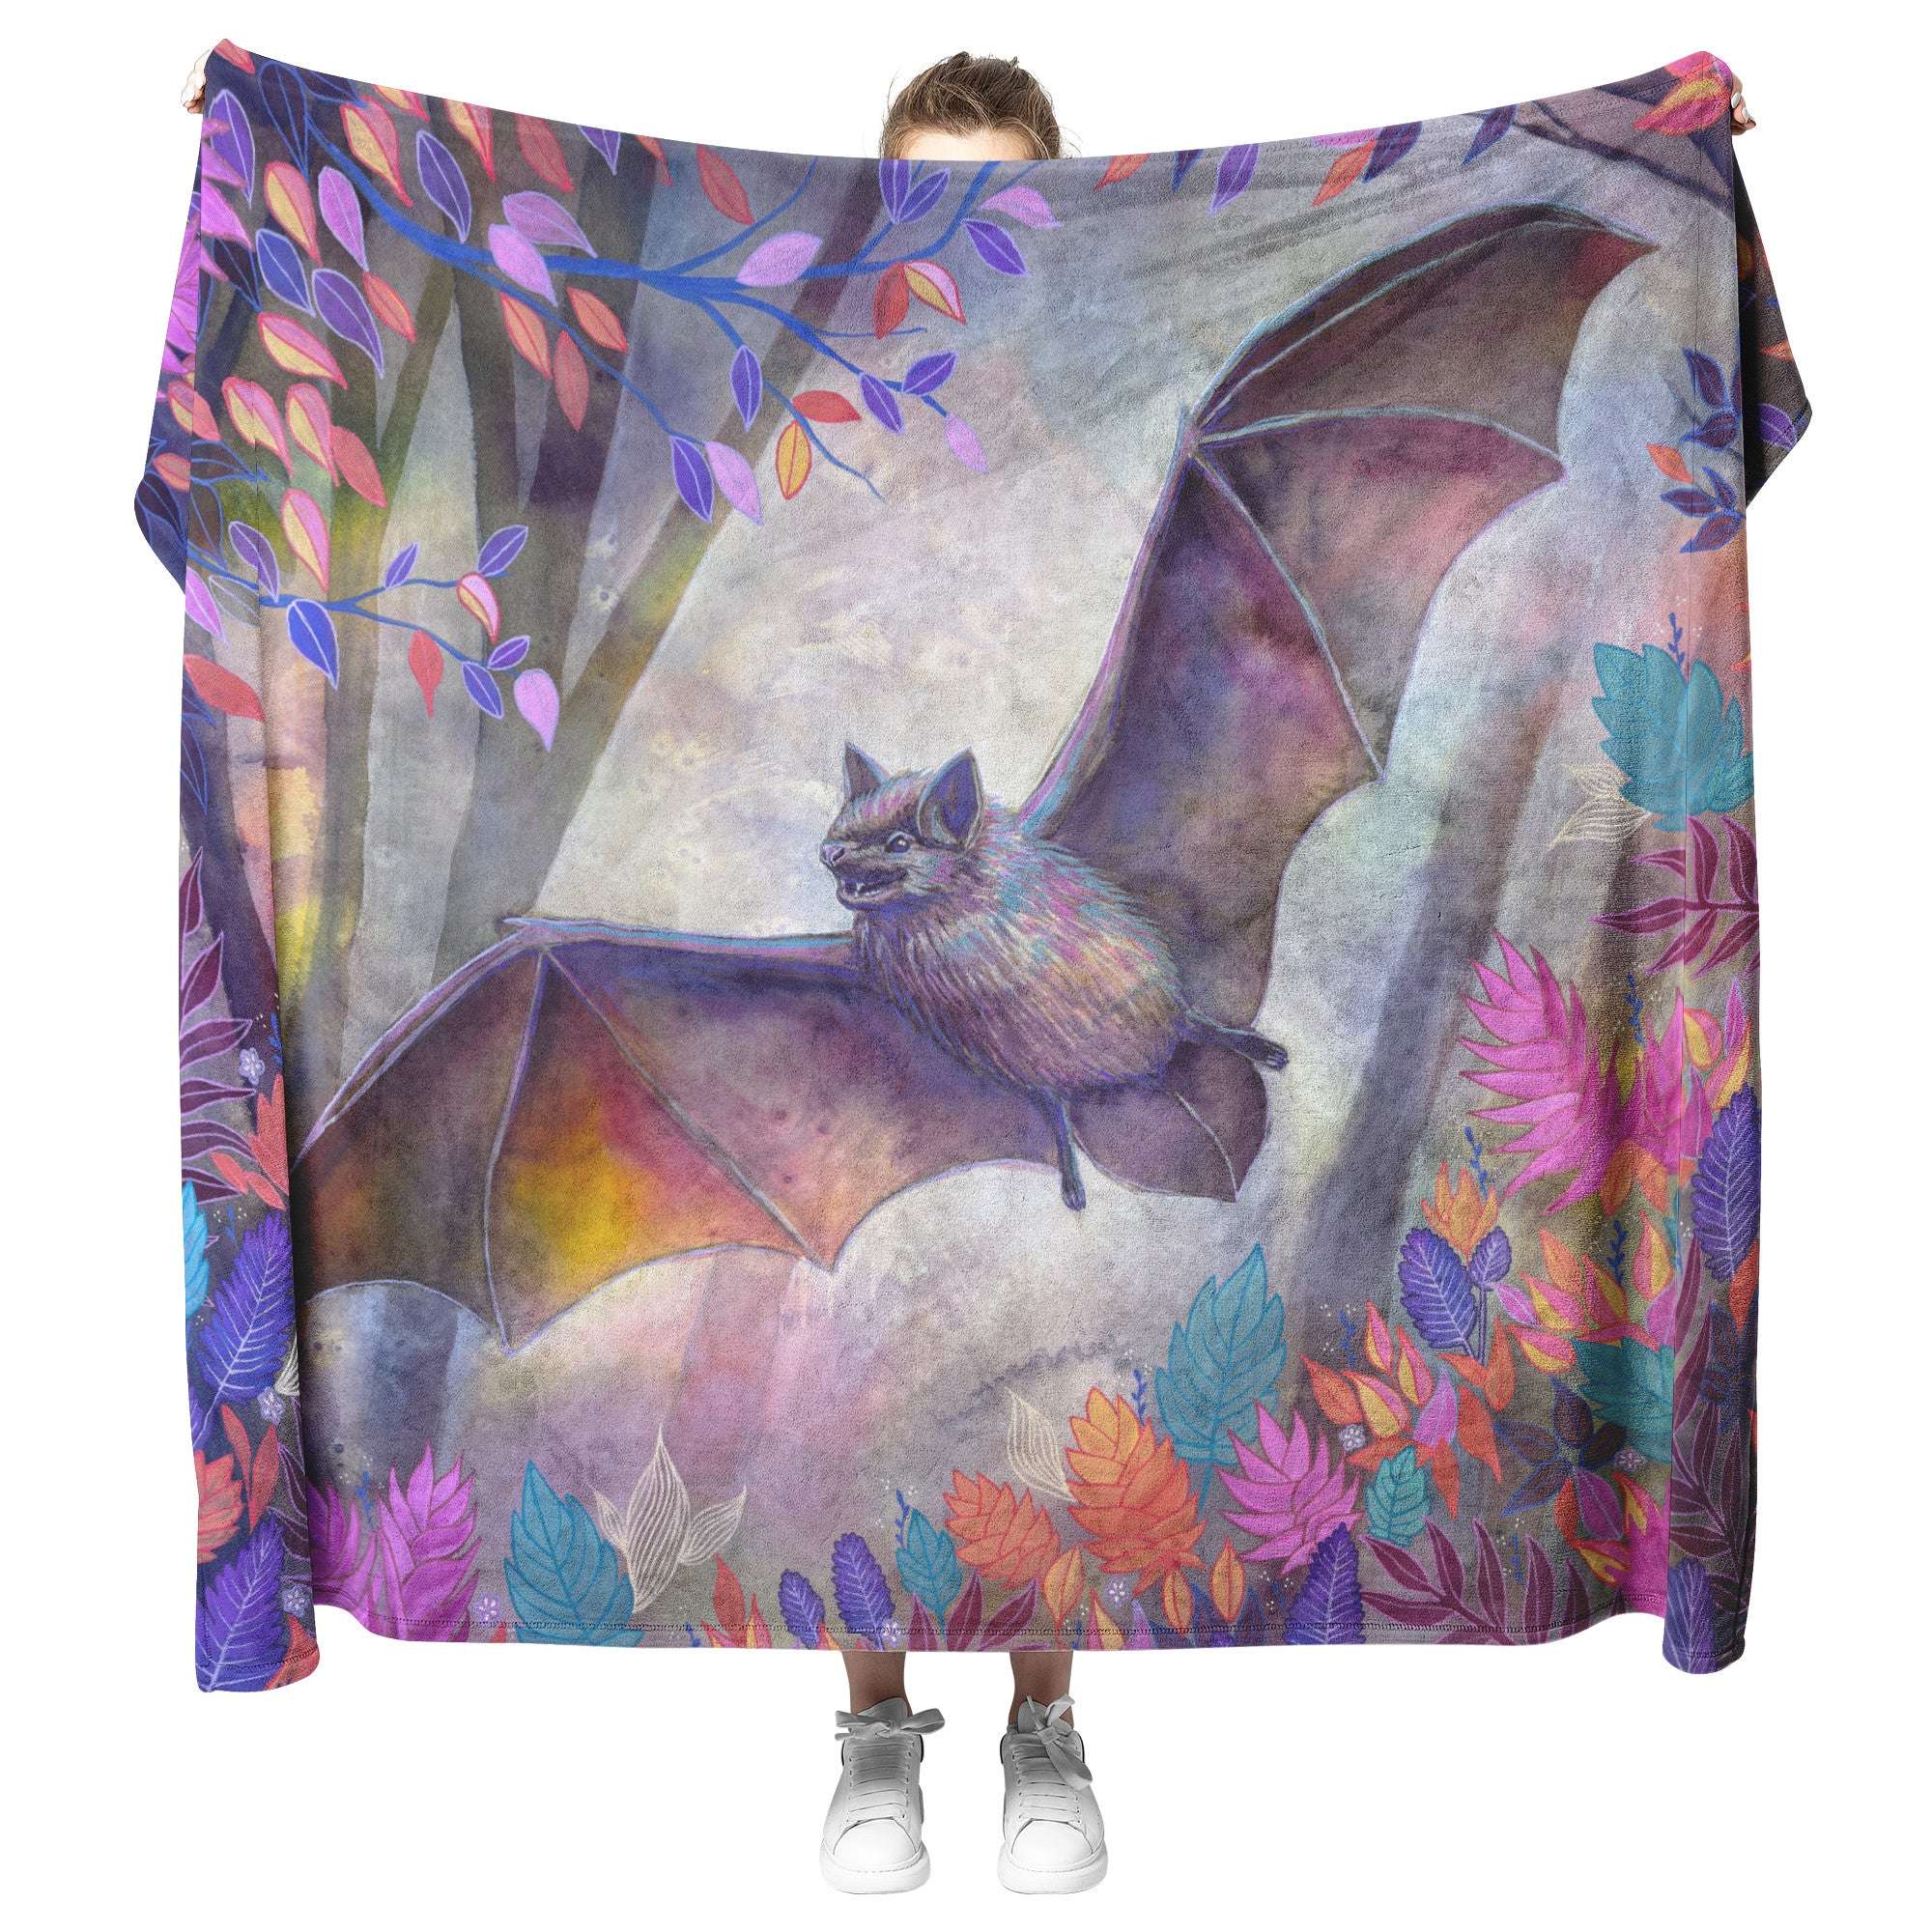 Person holding up a Bat Blanket in front of themselves, featuring a colorful illustration of a bat with wings spread, surrounded by vibrant foliage.